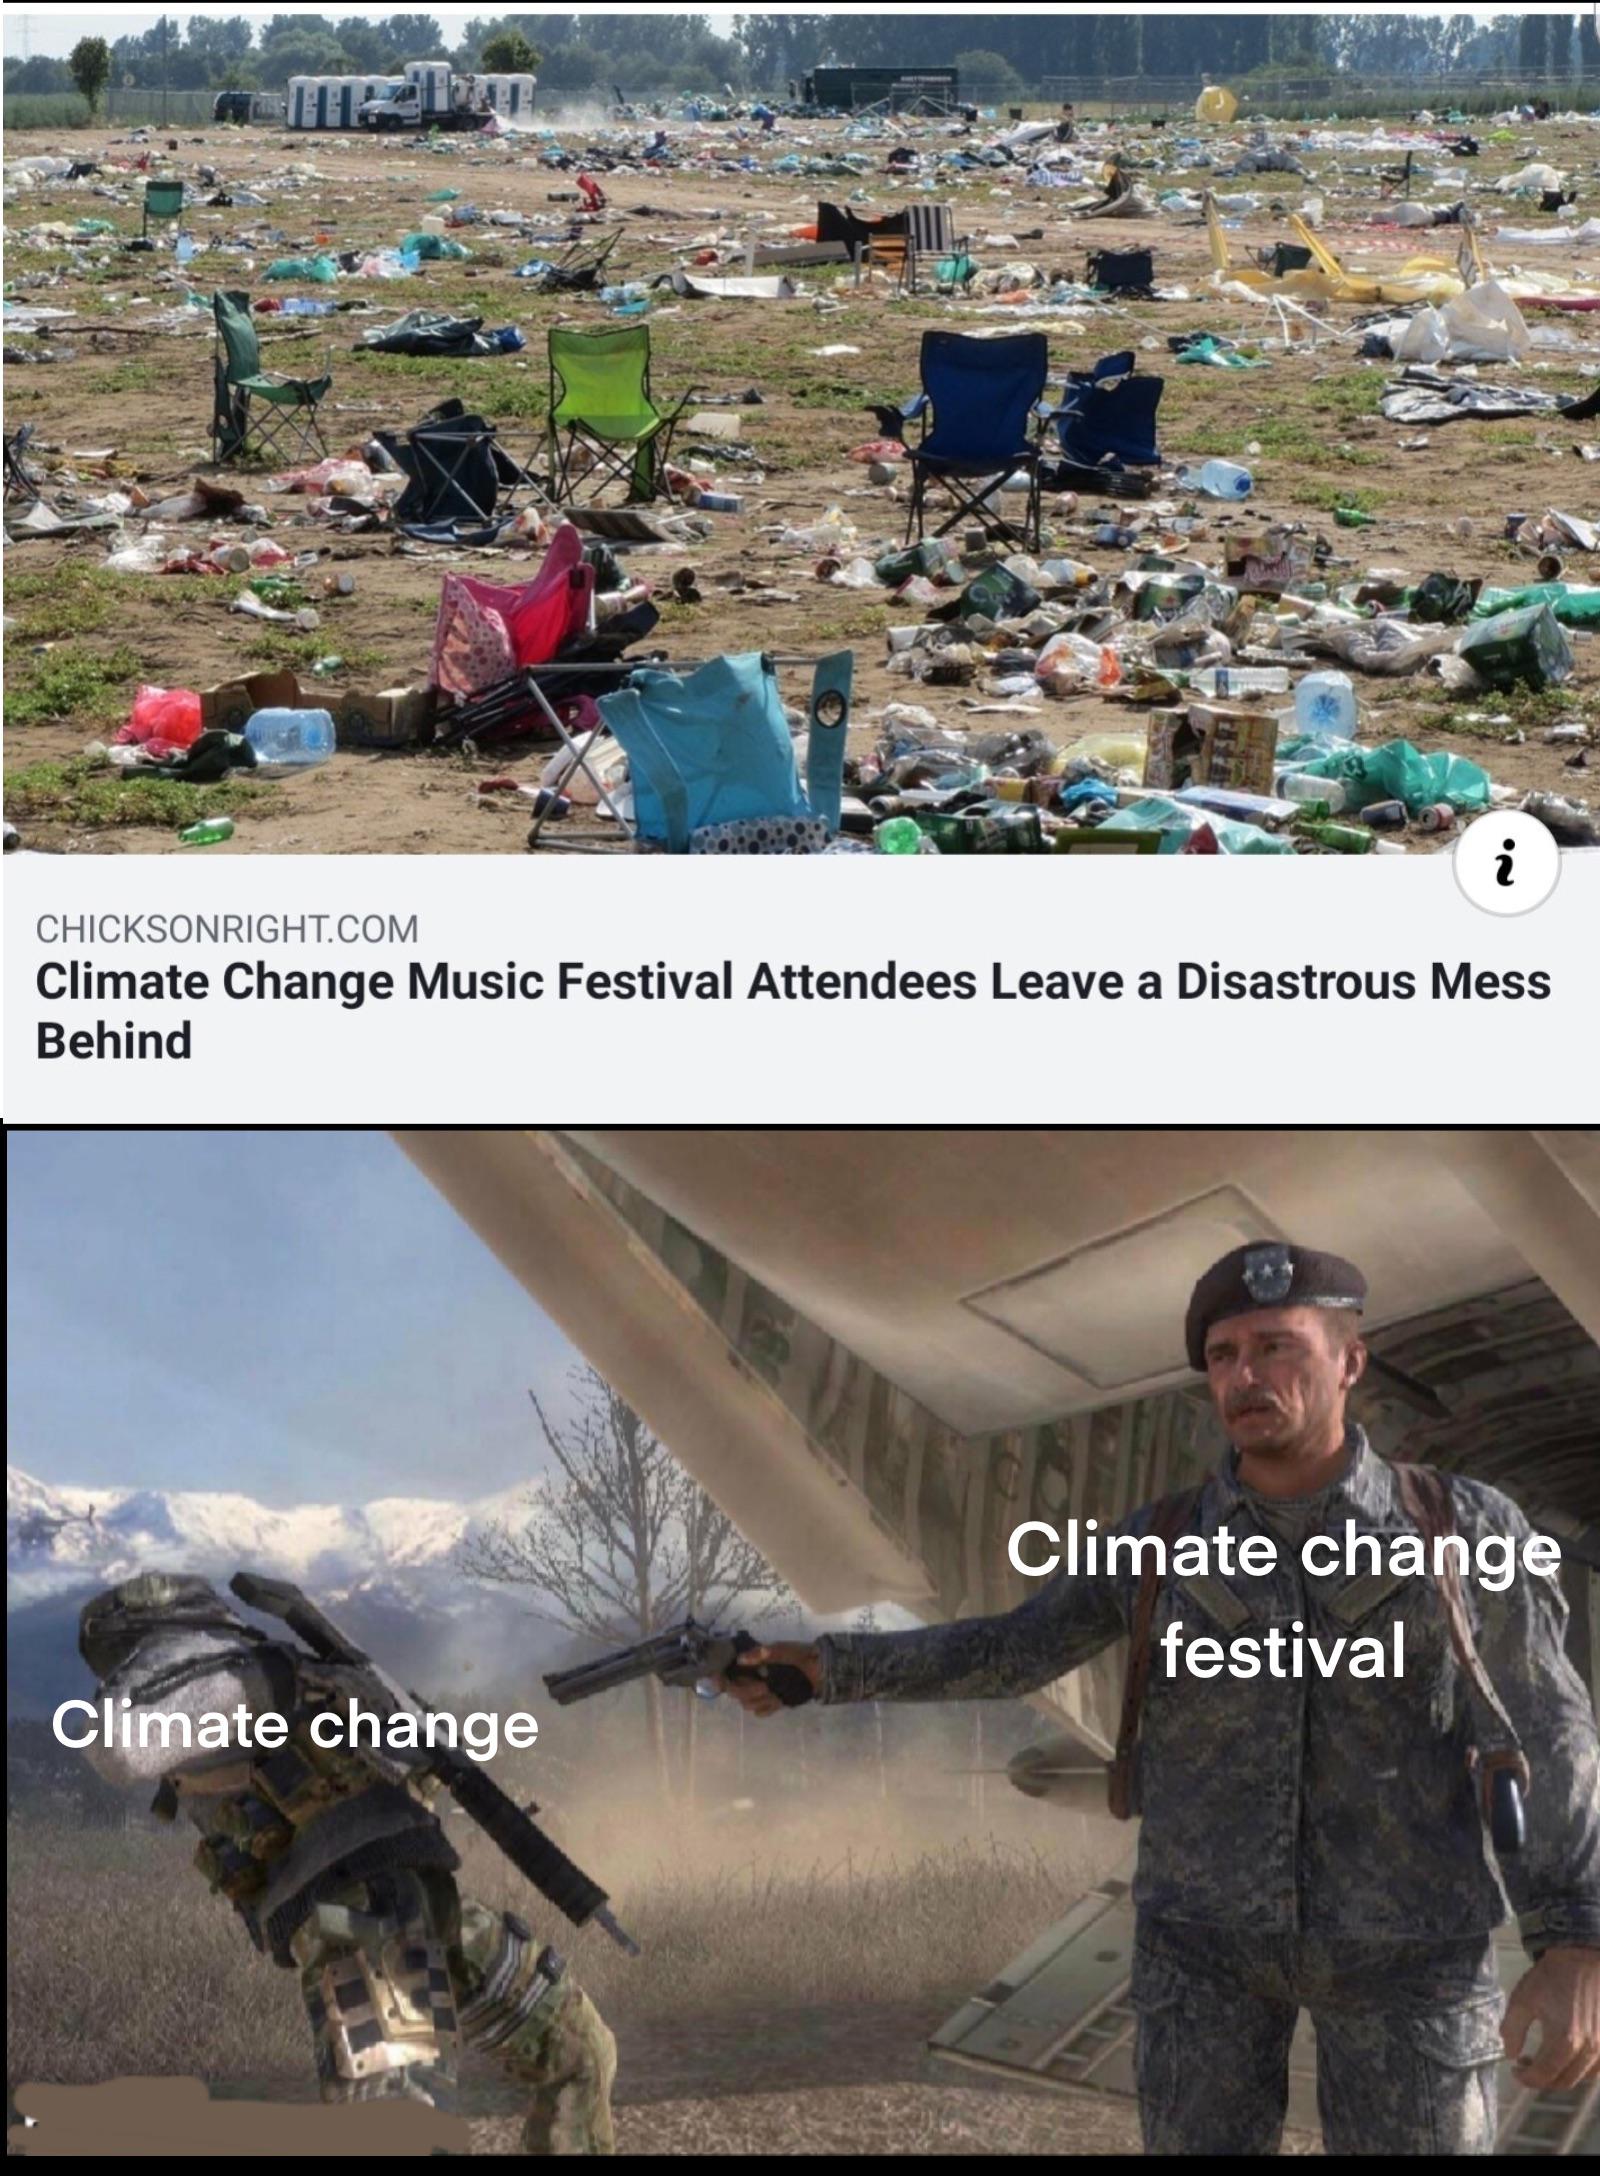 Dank Meme dank-memes cute text: CHICKSONRIGHT.COM Climate Change Music Festival Attendees Leave a Disastrous Mess Behind Climate chang festival Cl!mate change 